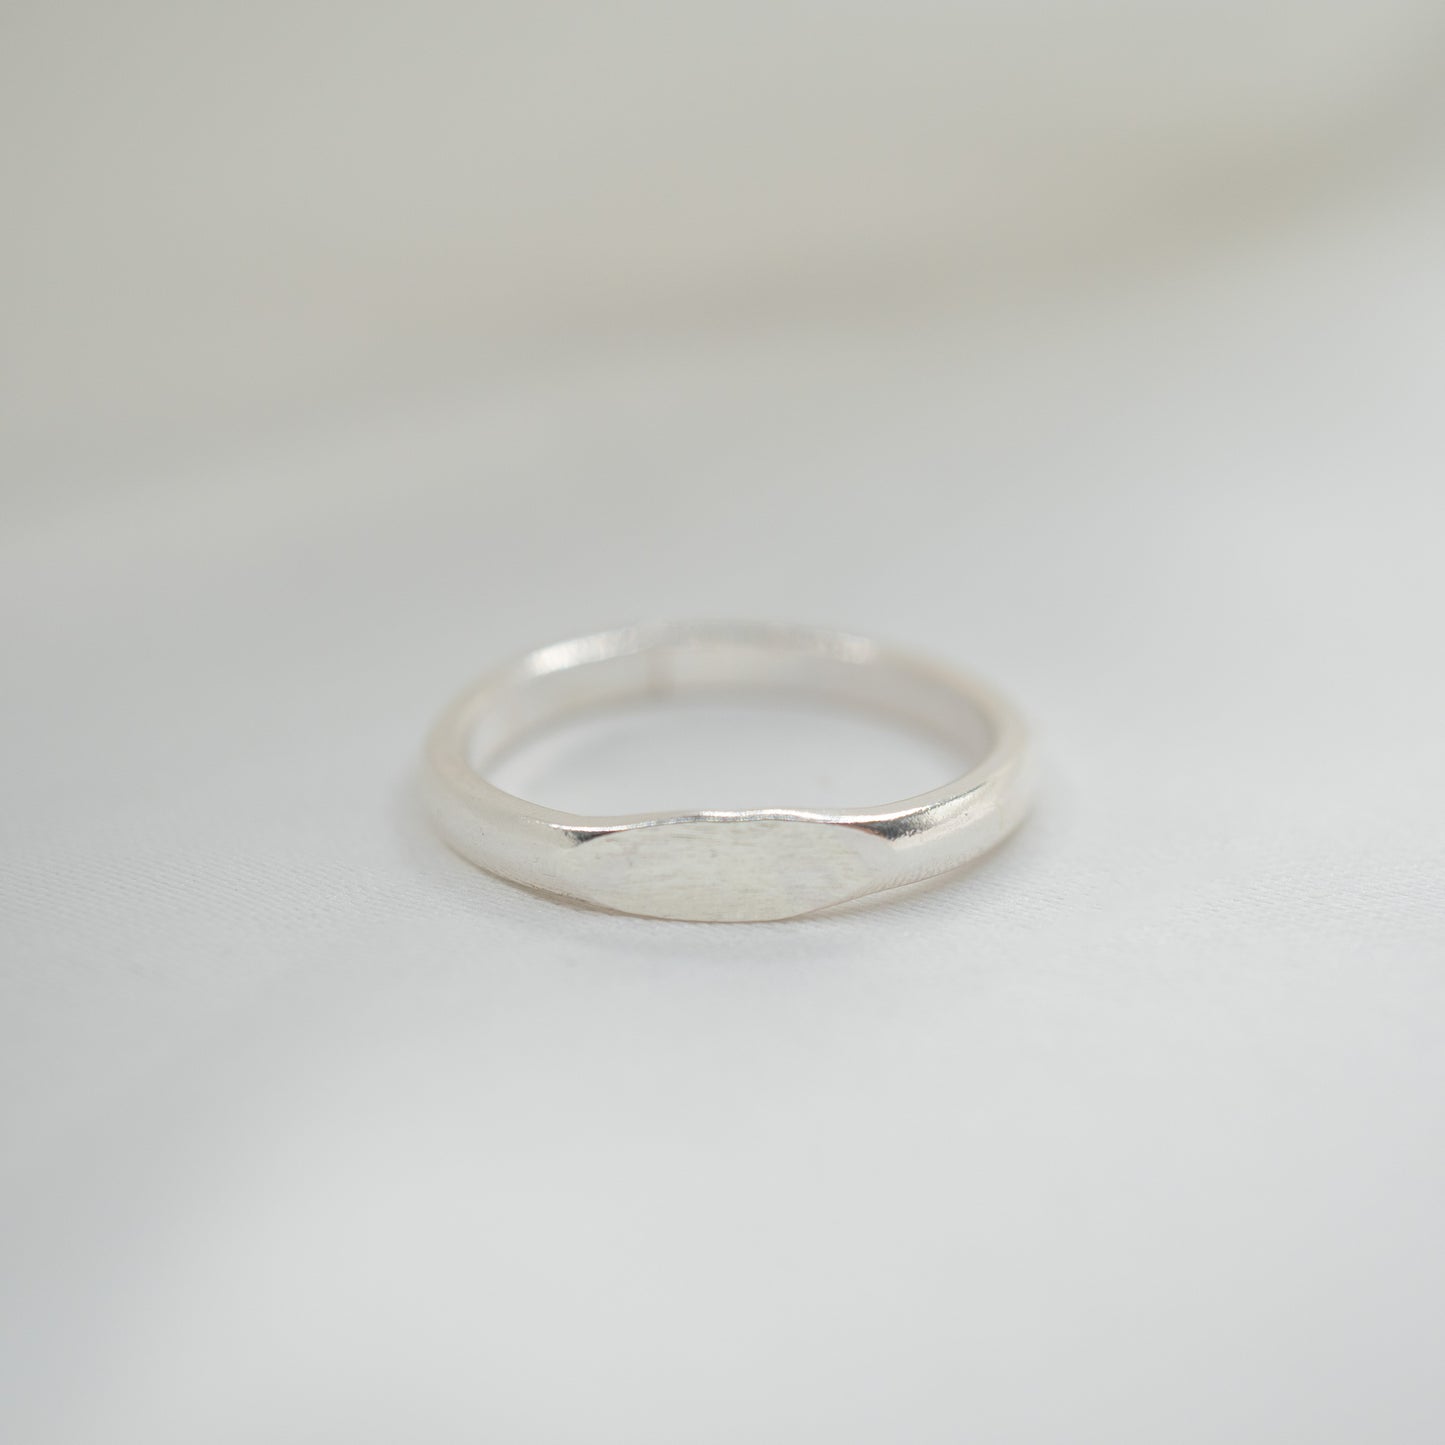 Sterling Silver Mini Signet Ring - shot on white - front view